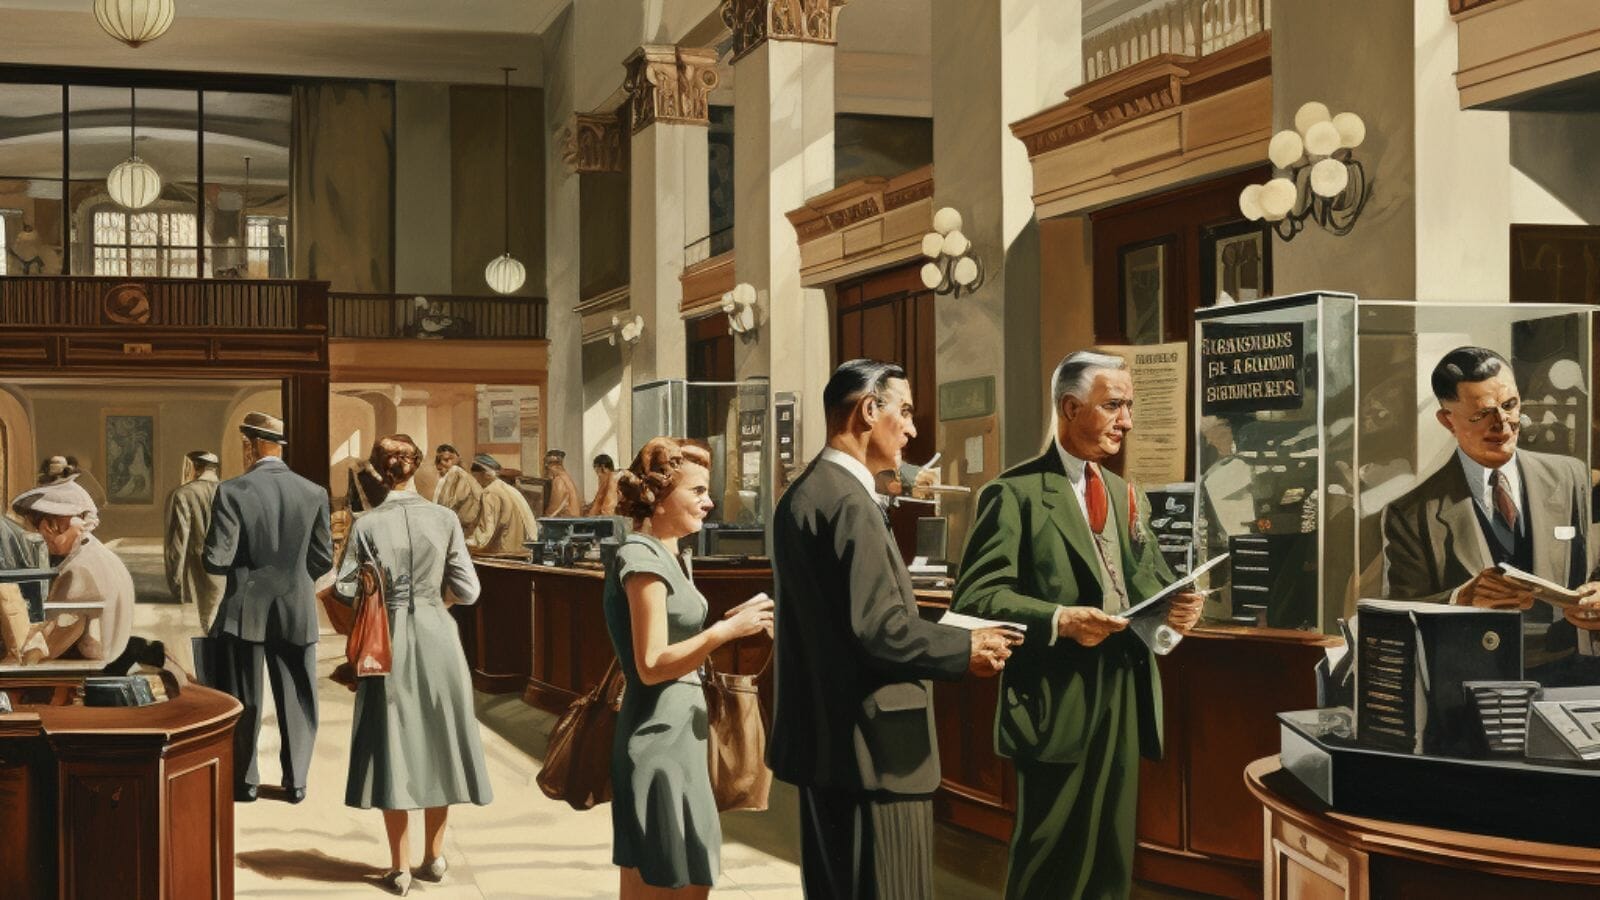 A group of people in a bank

